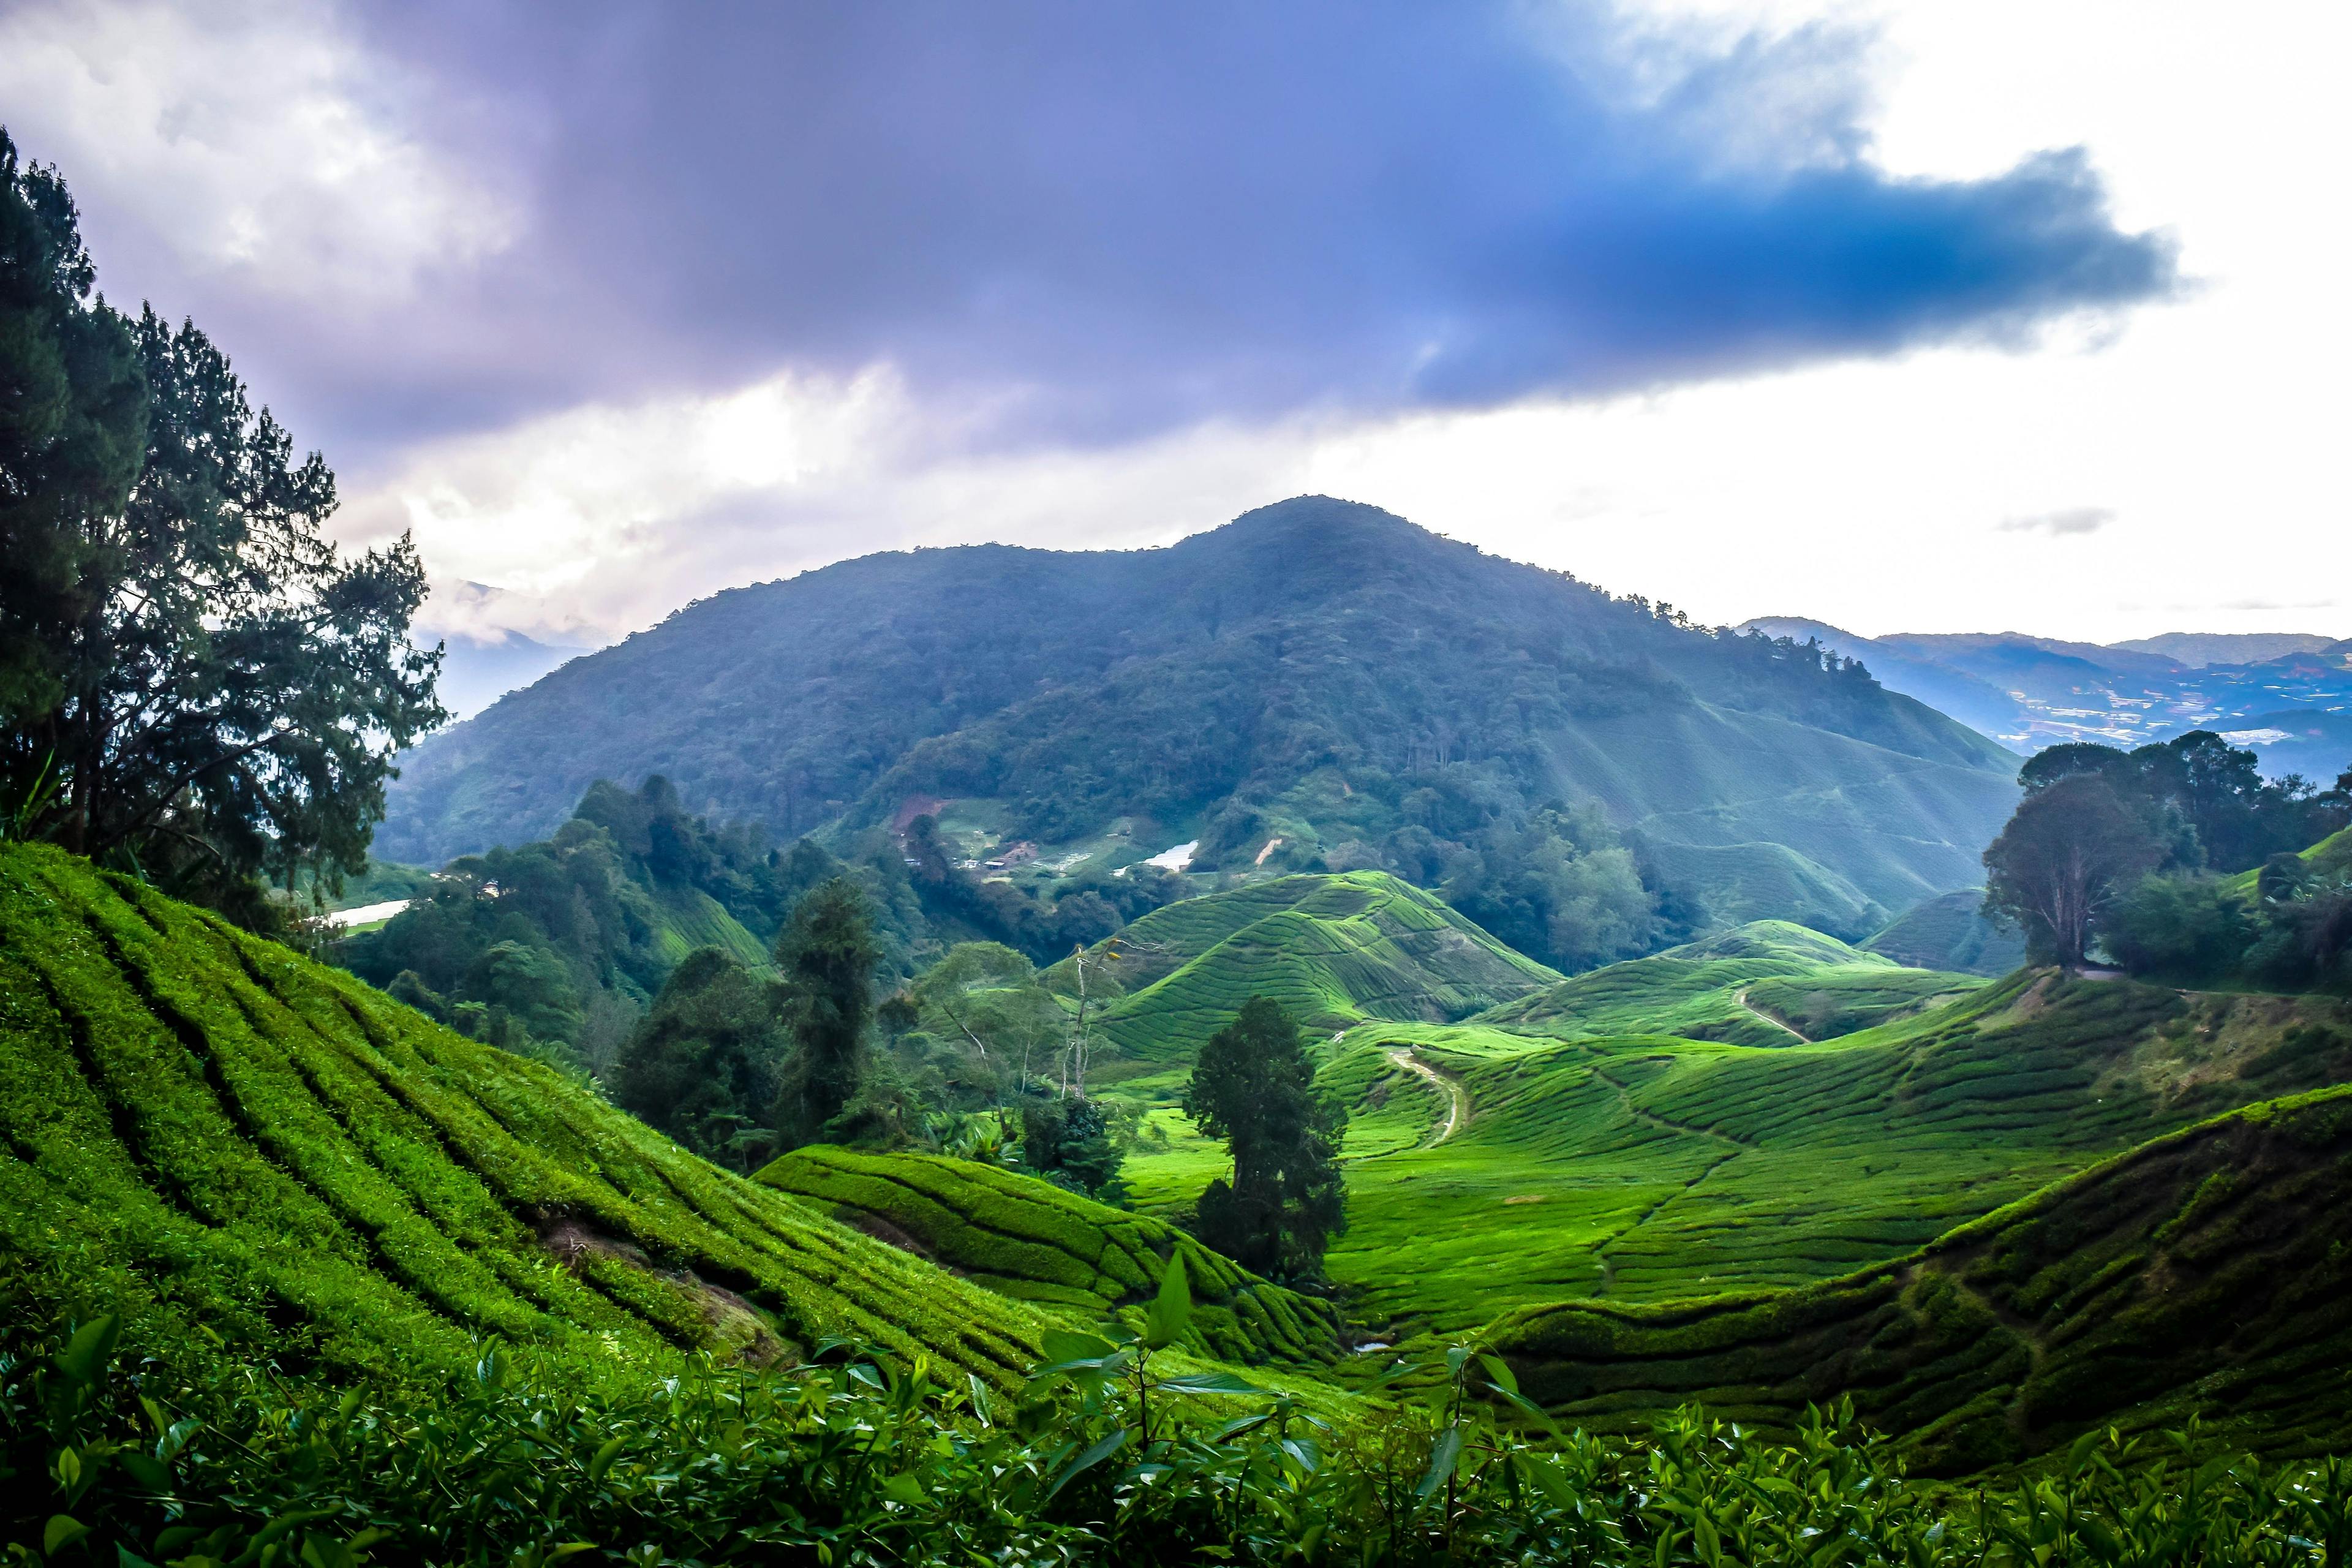 View on Cameron Highlands in Pahang Malaysia.